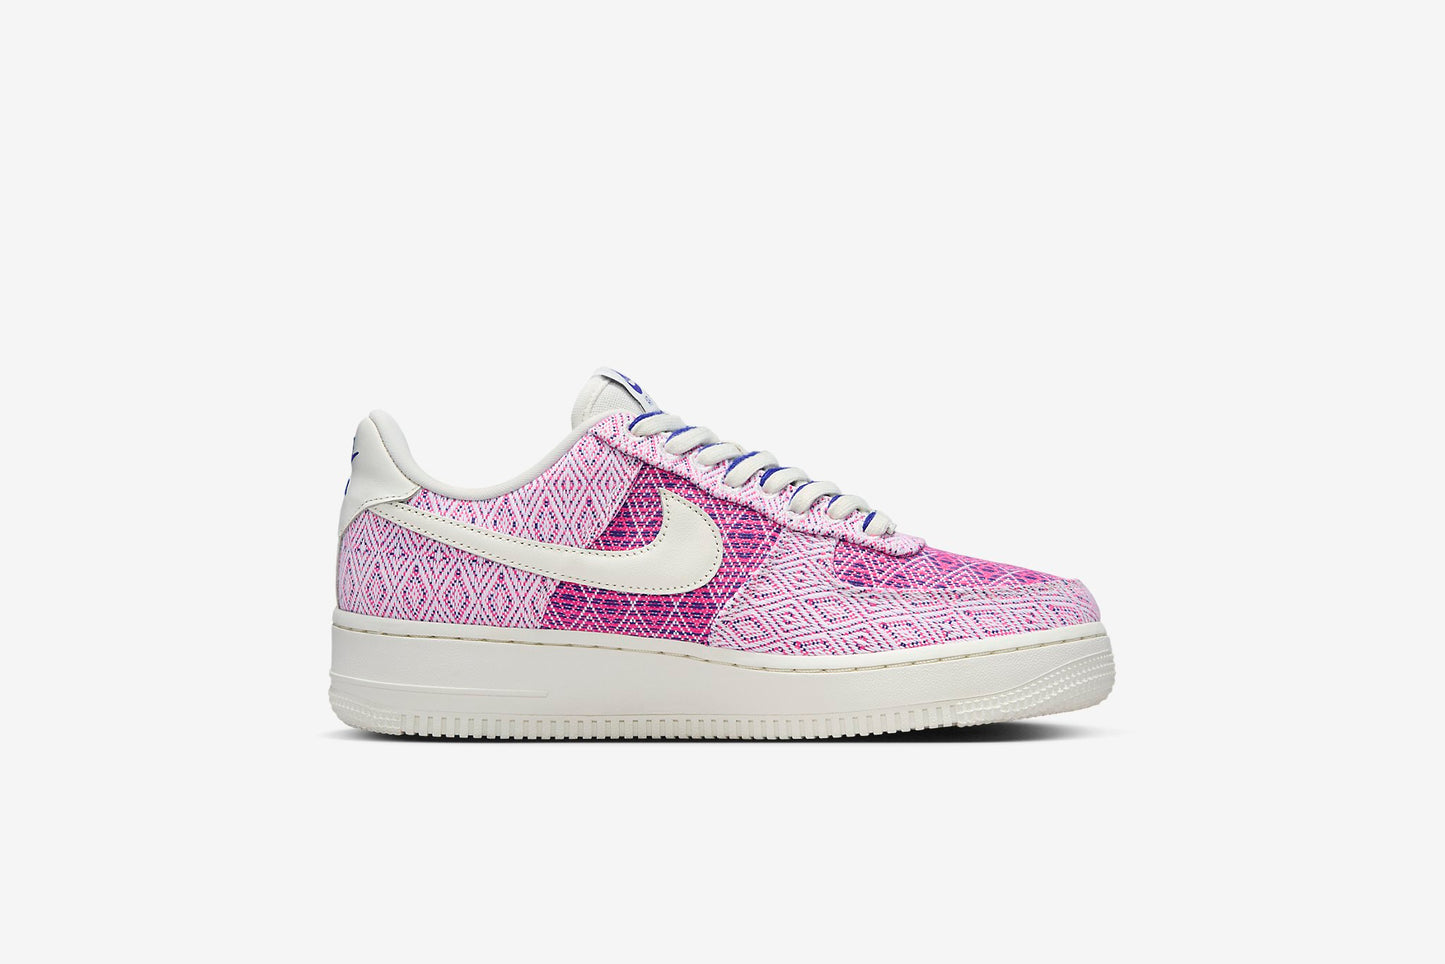 Nike "Air Force 1 '07" W - Multi-color/Sail-Concord